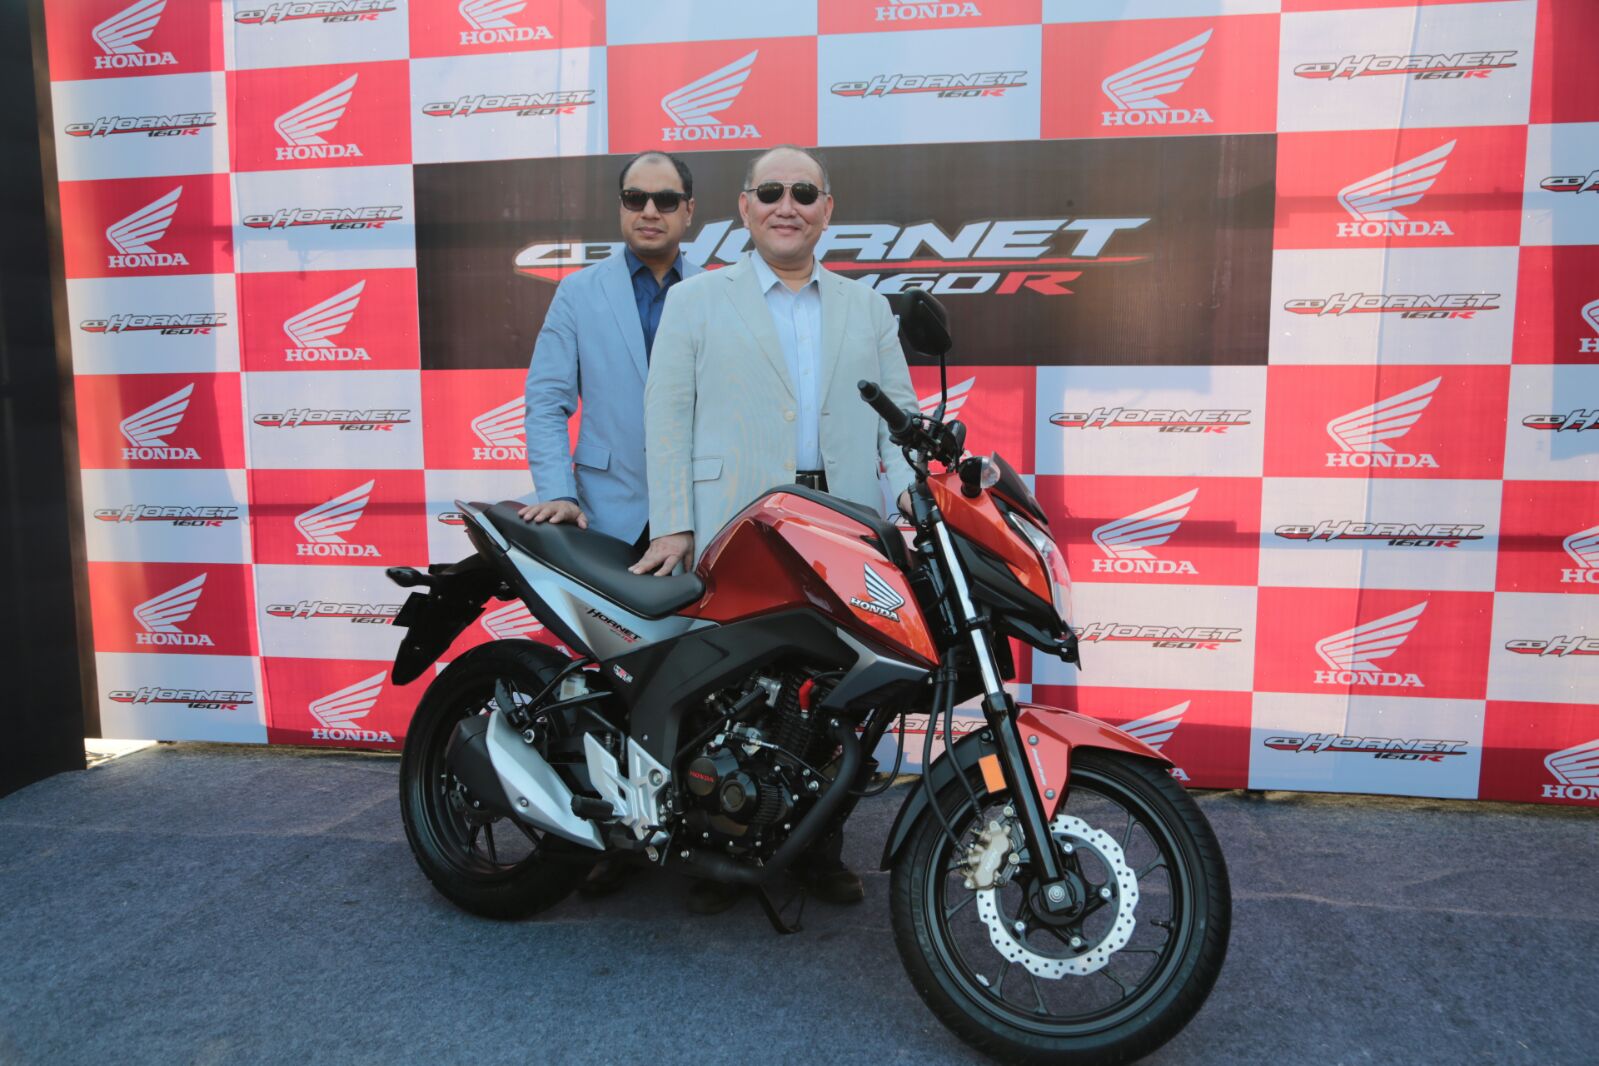 Honda Cb Hornet 160r Launched Prices Start At Inr 79 900 Motoroids